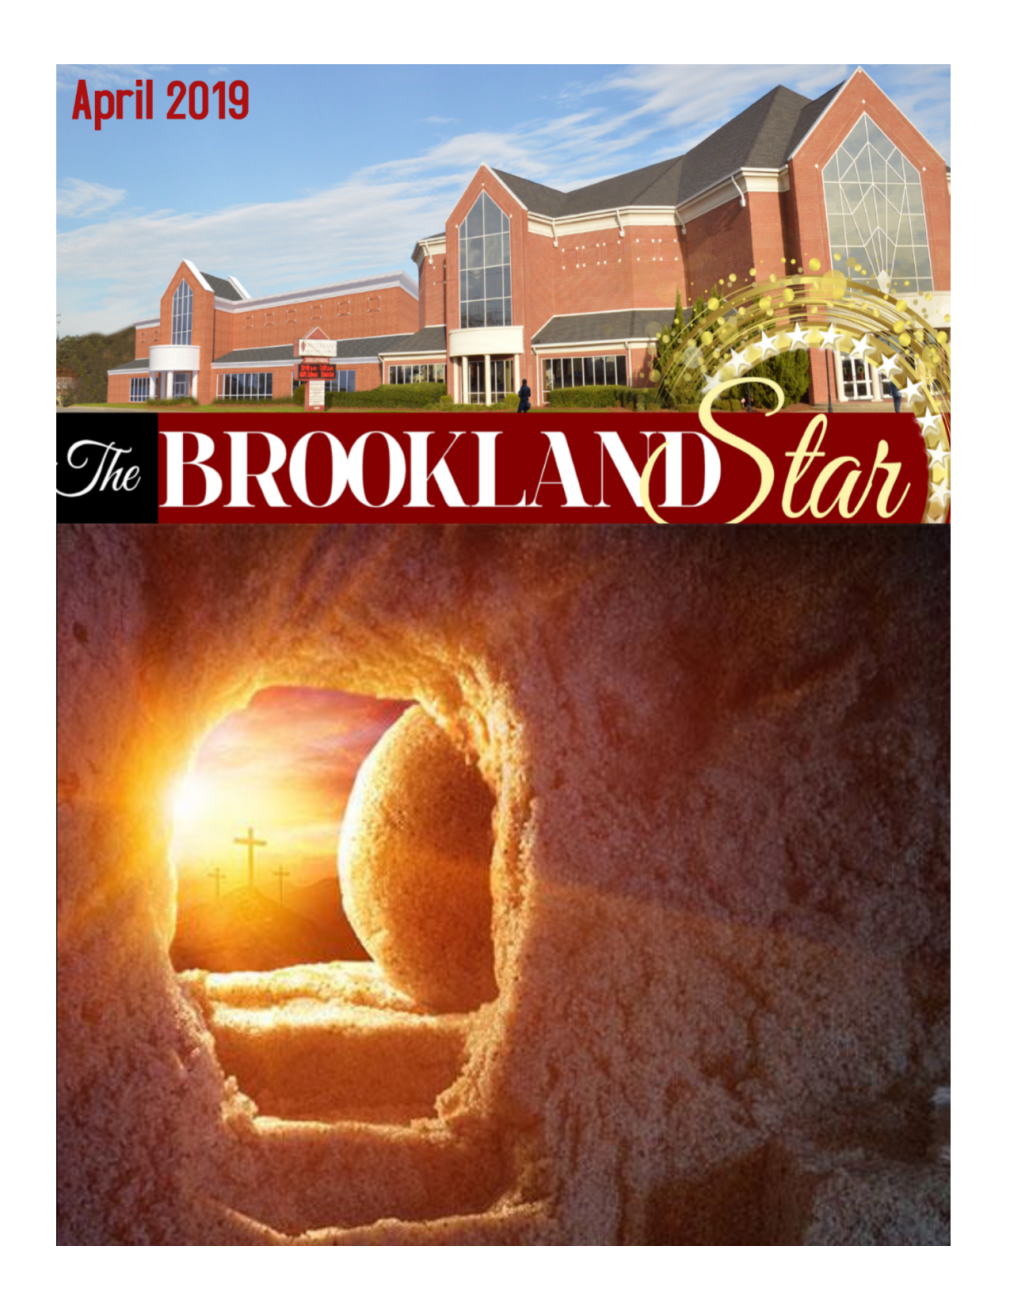 The Brookland Star April 2019 Edition